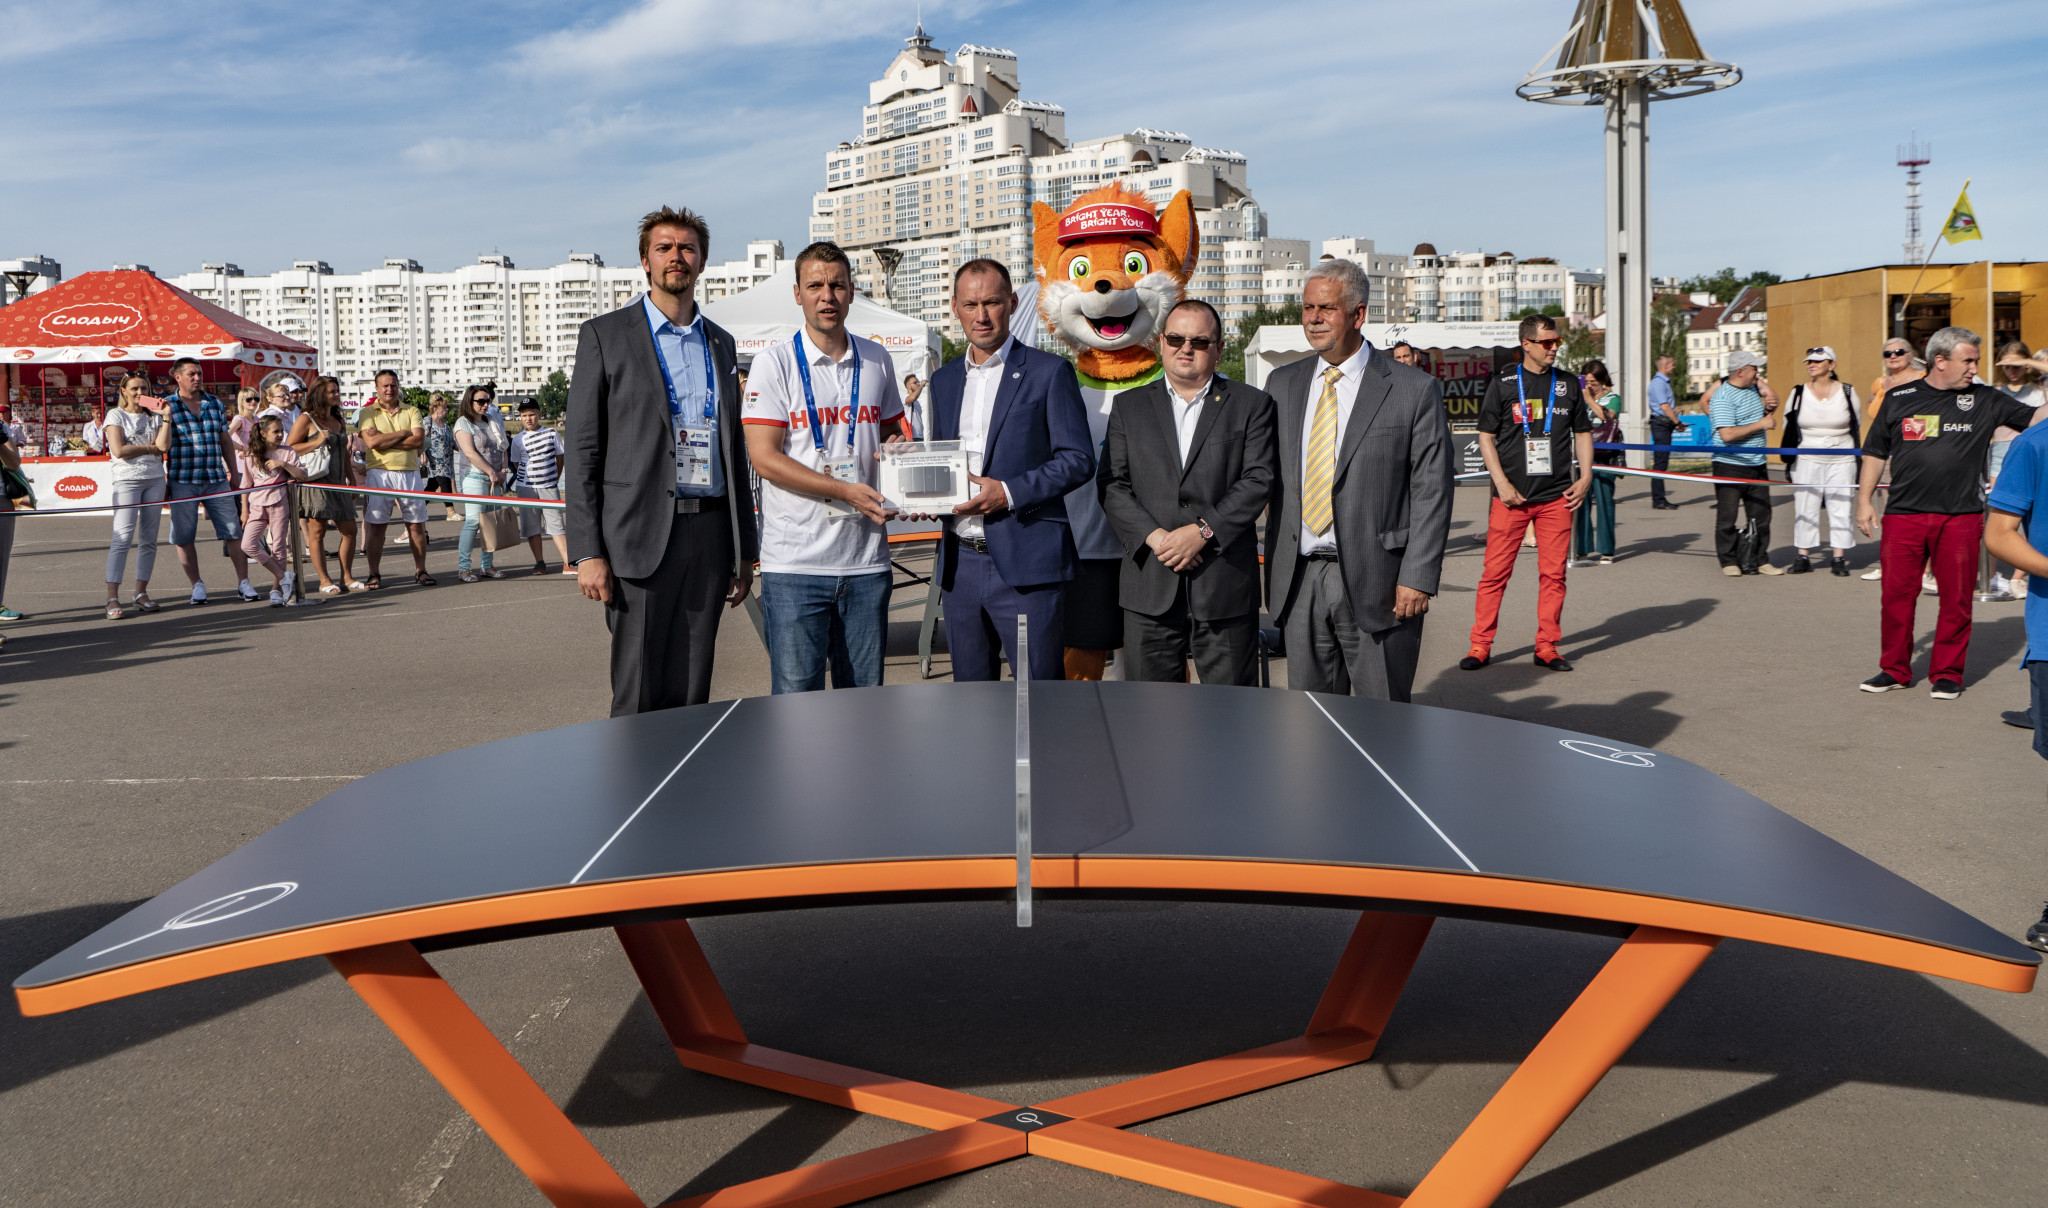 Teqball exhibited at Minsk 2019 fan zone as part of celebration of Hungarian culture